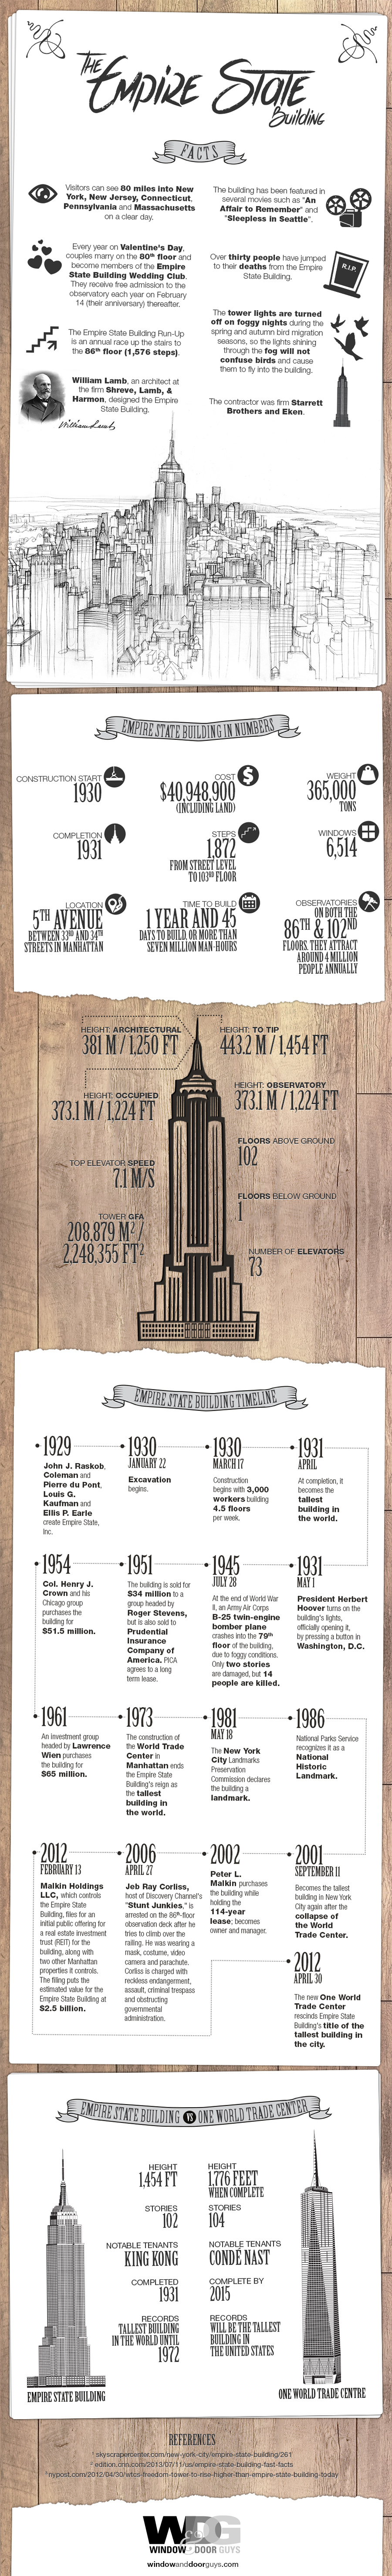 Facts About The Empire State Building